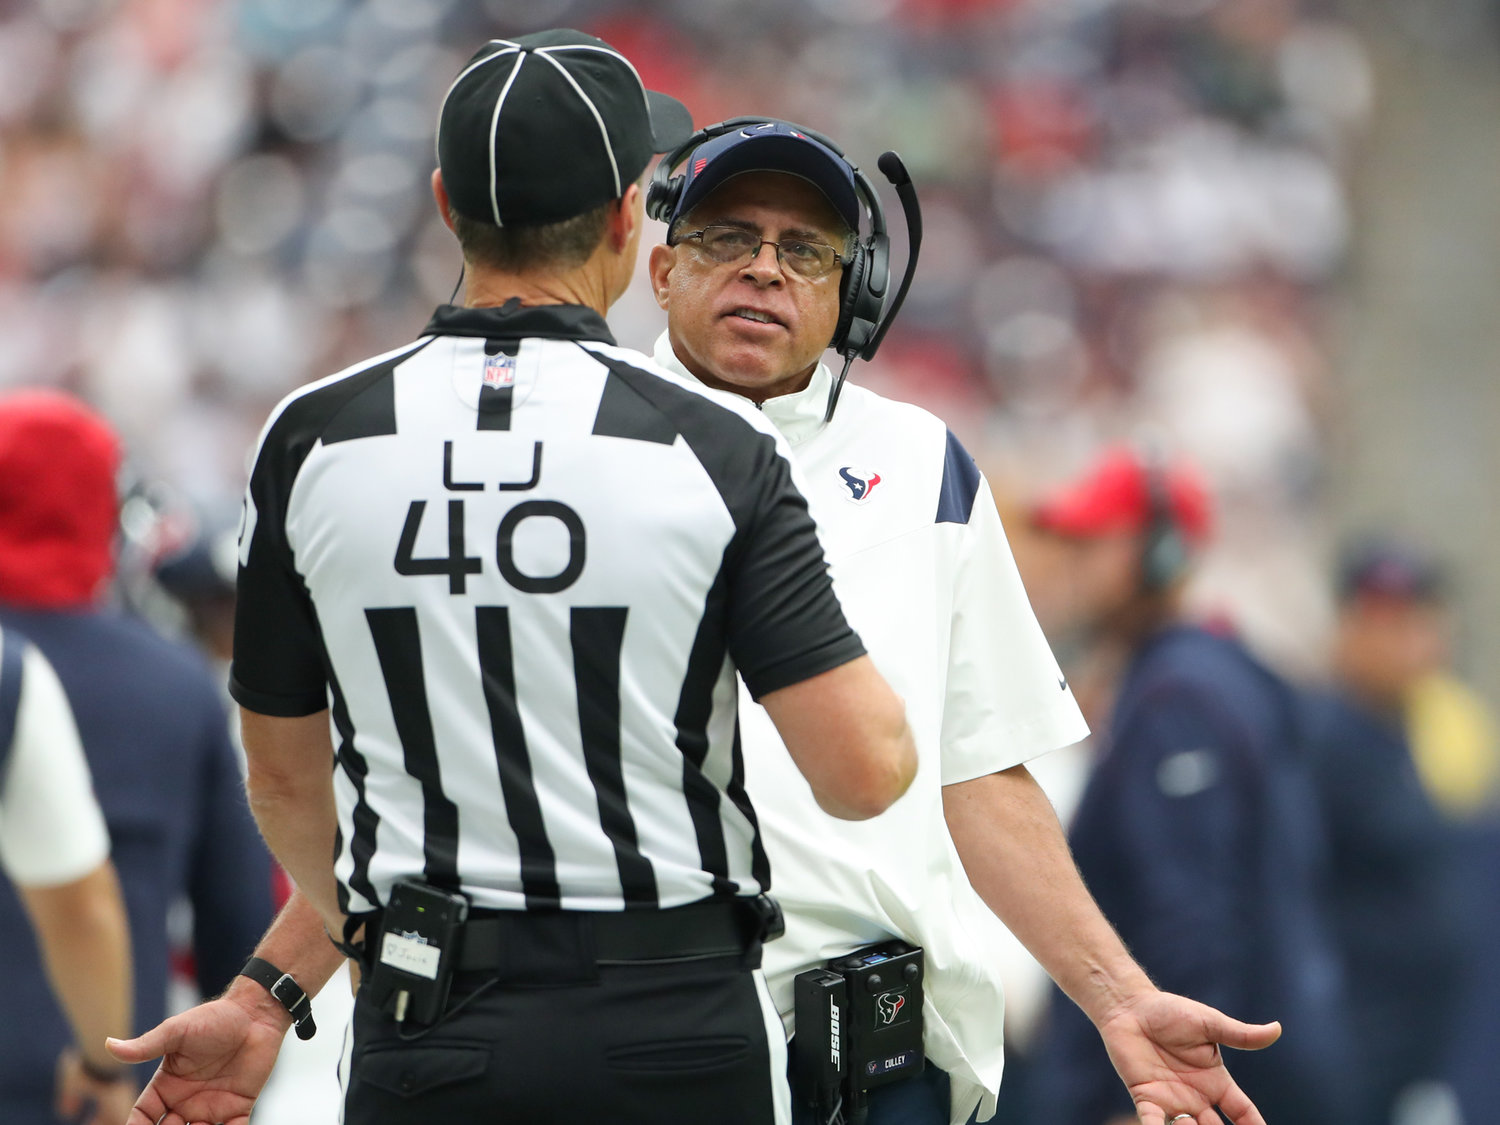 Houston Texans head coach David Culley talks with line judge Brian Bolinger (40) after an offensive pass interference call against the Texans during the first half of an NFL game between the Houston Texans and the Jacksonville Jaguars on September 12, 2021 in Houston, Texas.